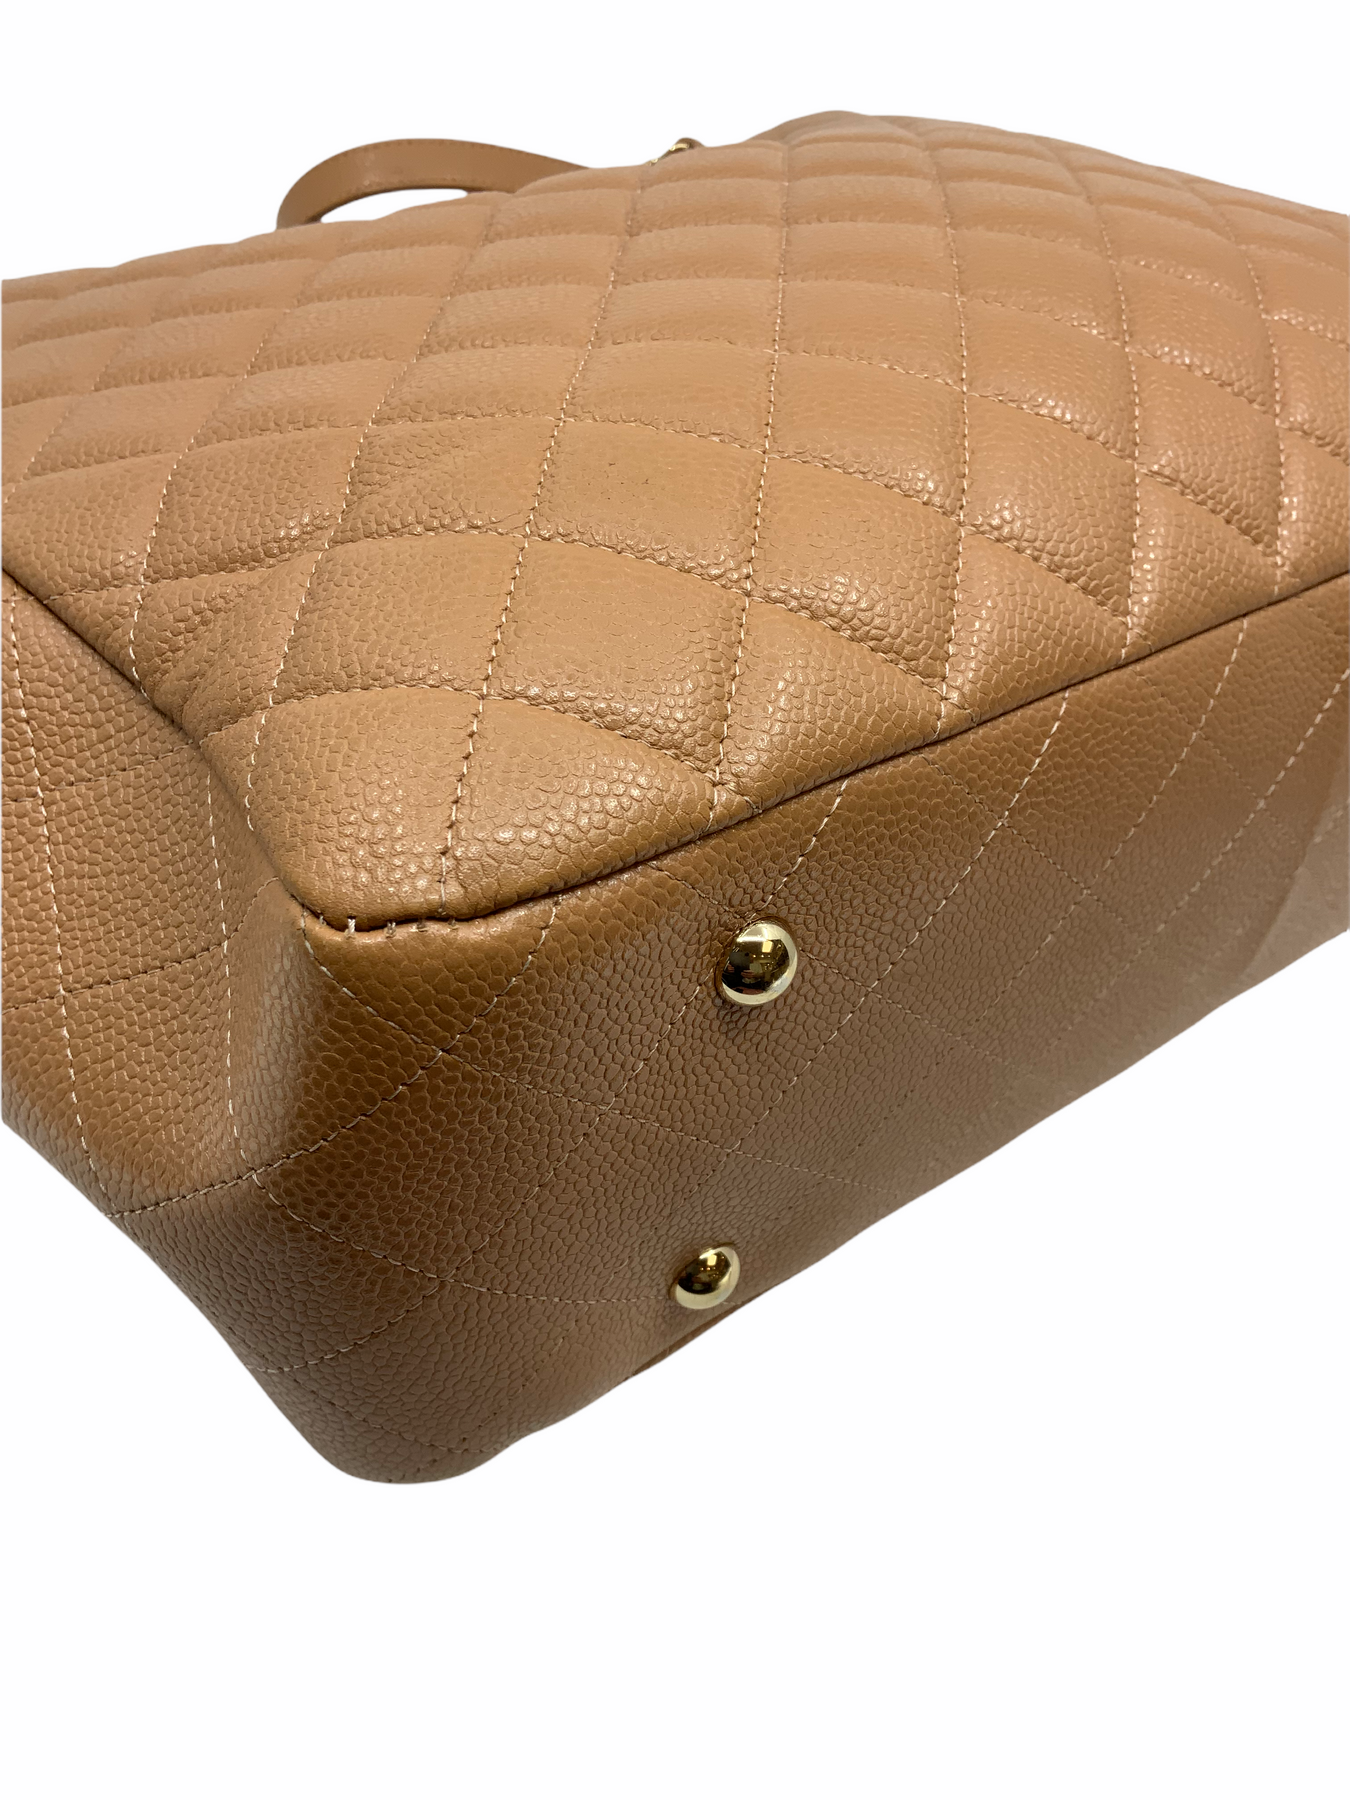 Chanel Quilted Beige Calfskin Thin City Accordion Turnlock Large Tote Bag,  2013. at 1stDibs